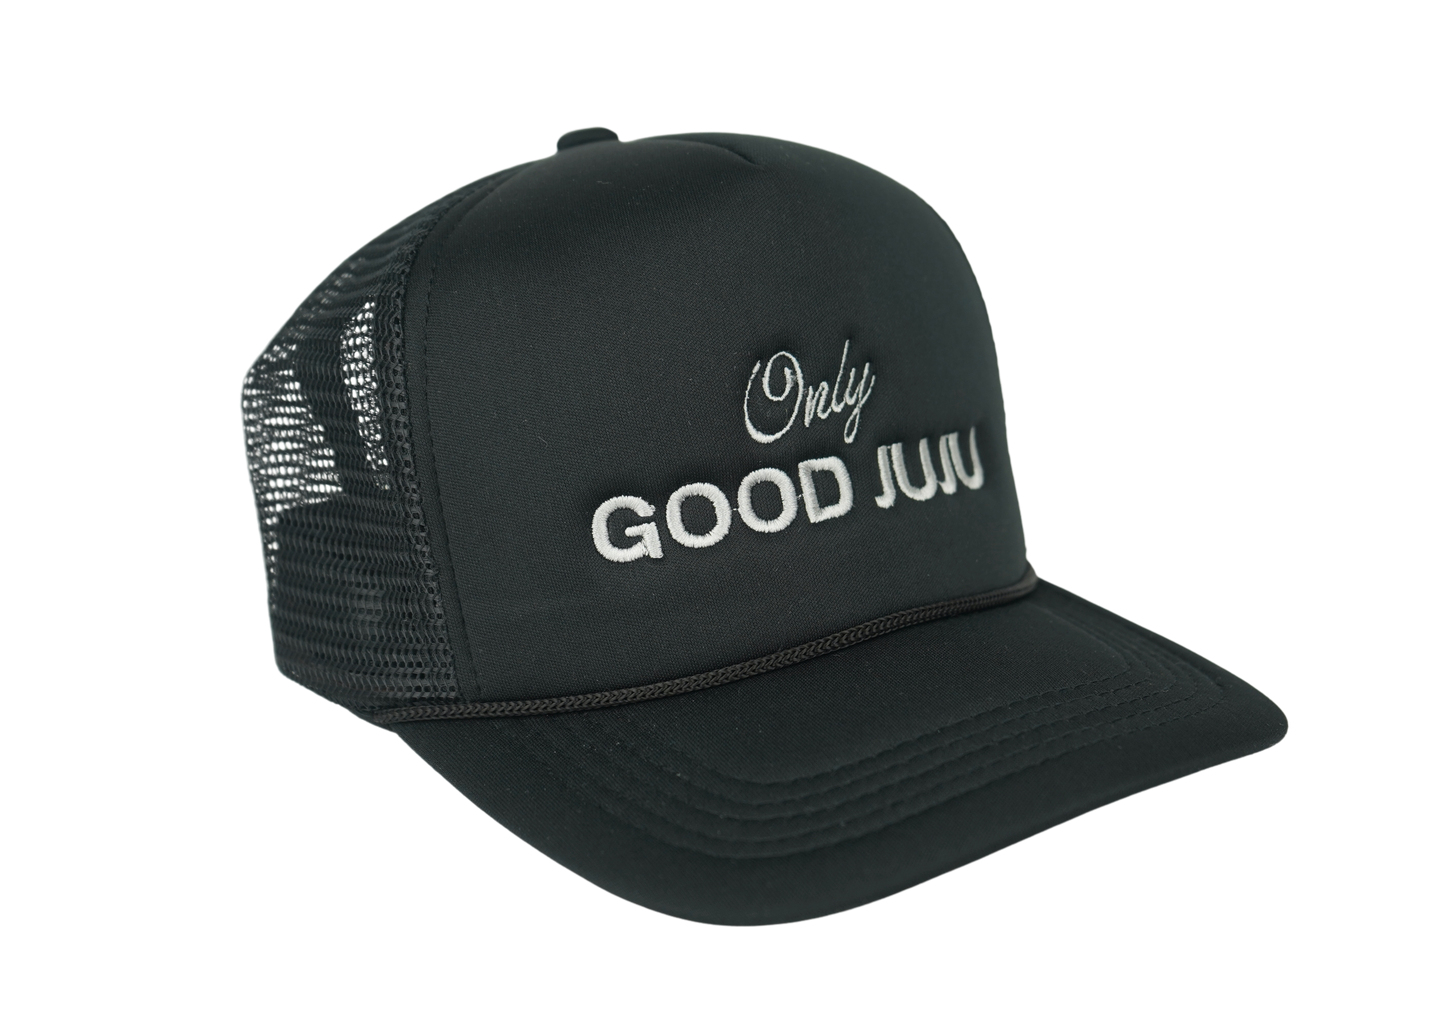 Only Good JuJu Embroidered Trucker Hat - Black